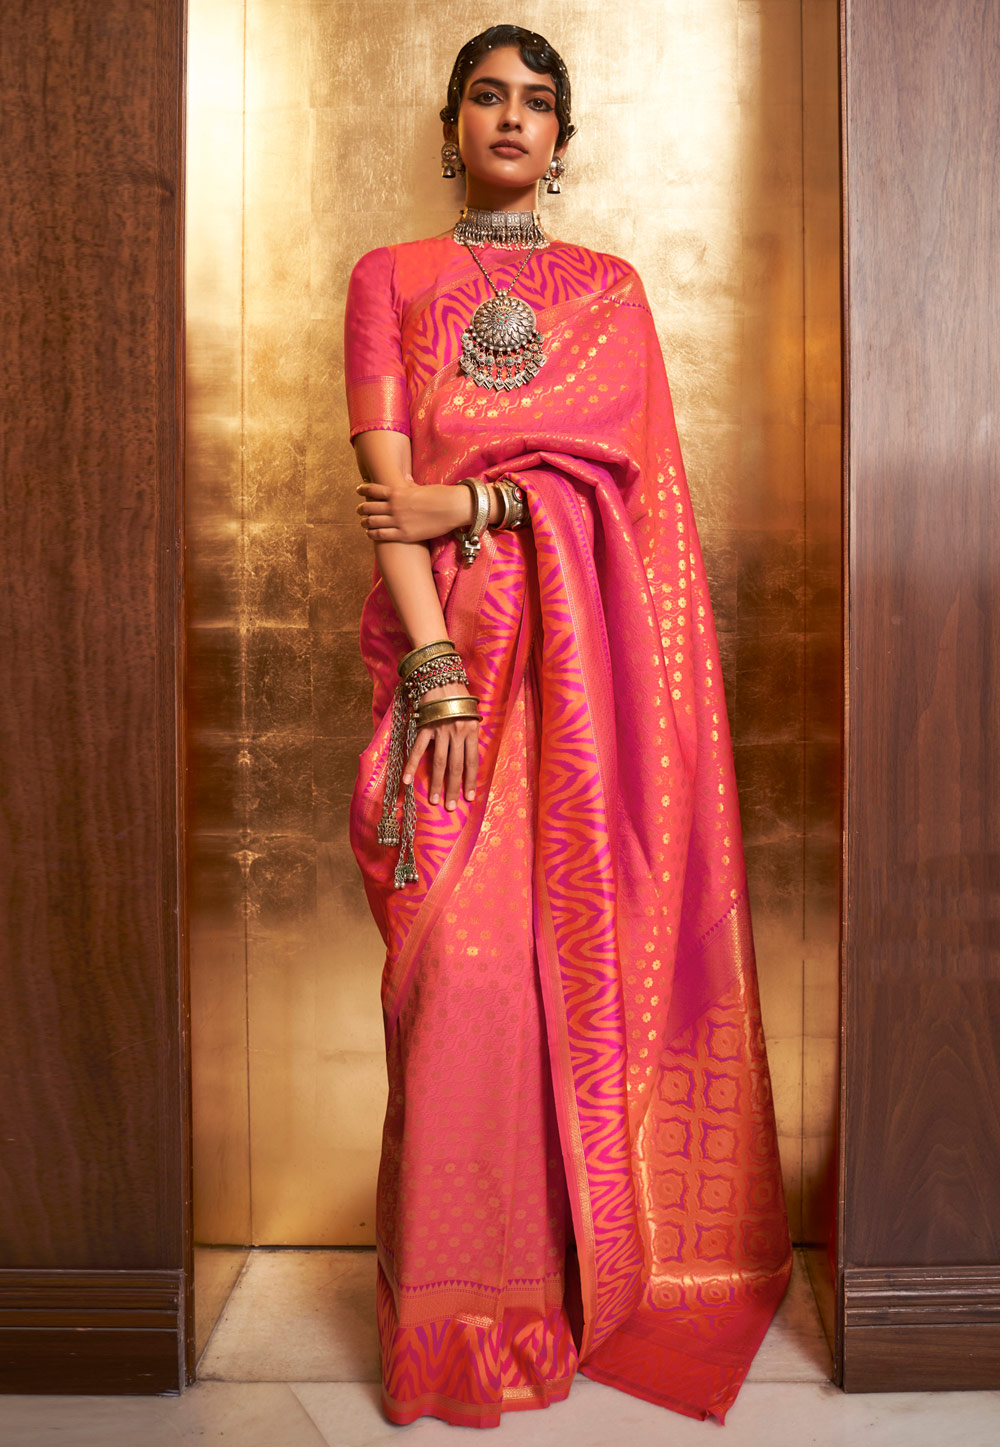 Baby pink silksaree with orange blouse | Indian bride outfits, Bridal sarees  south indian, Indian wedding outfits